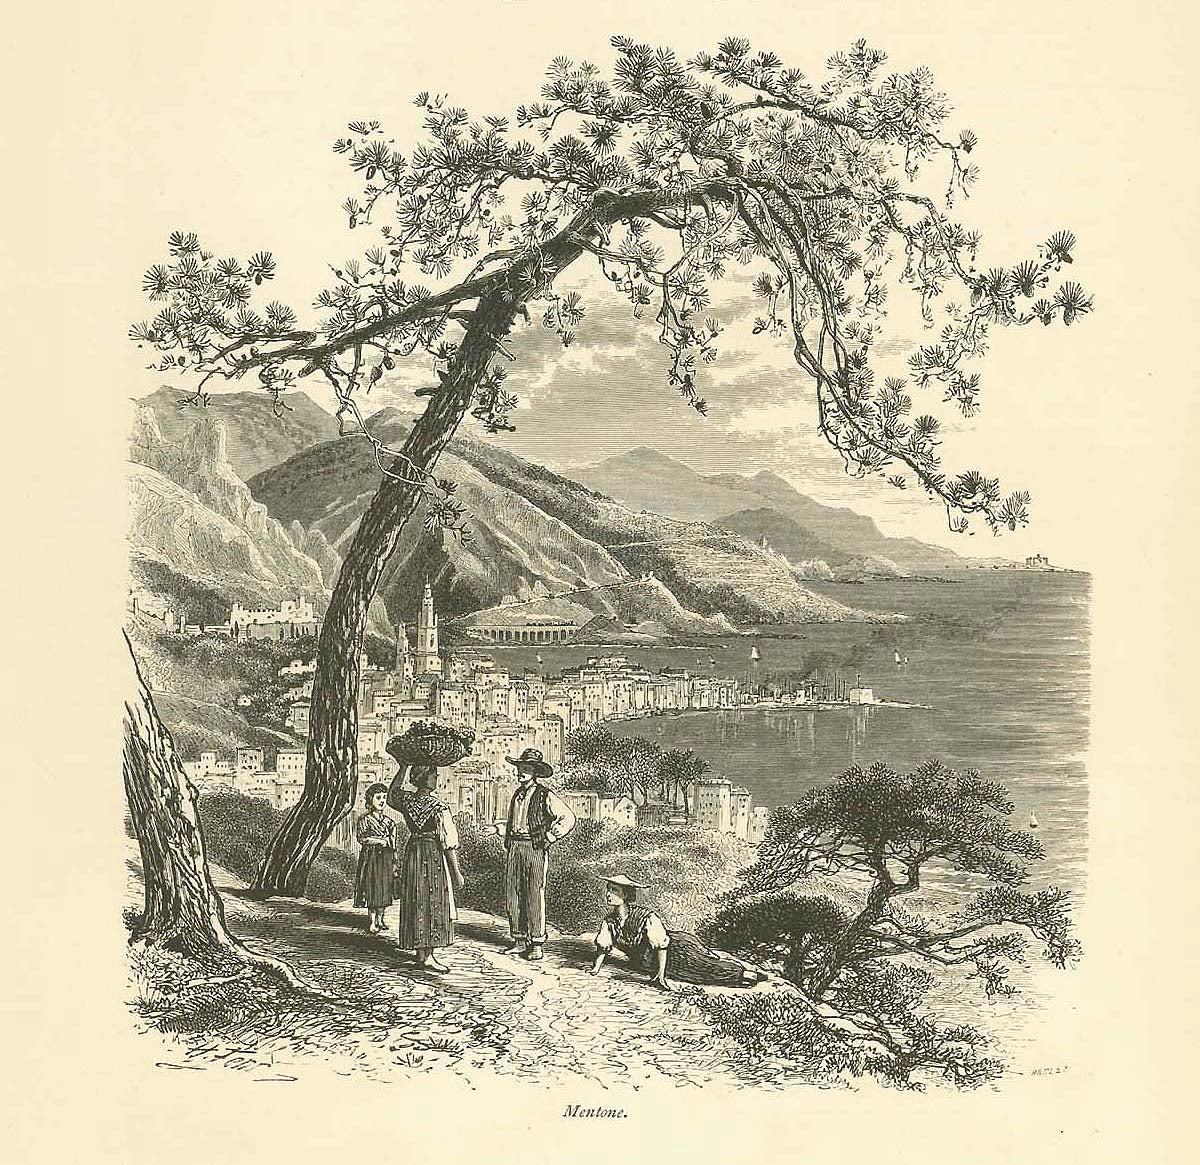 "Mentone" - Menton - France  Wood engraving published ca 1875.  On the reverse side is an image of Ventimiglia.  Original antique print  , interior design, wall decoration, ideas, idea, gift ideas, present, vintage, charming, special, decoration, home interior, living room design